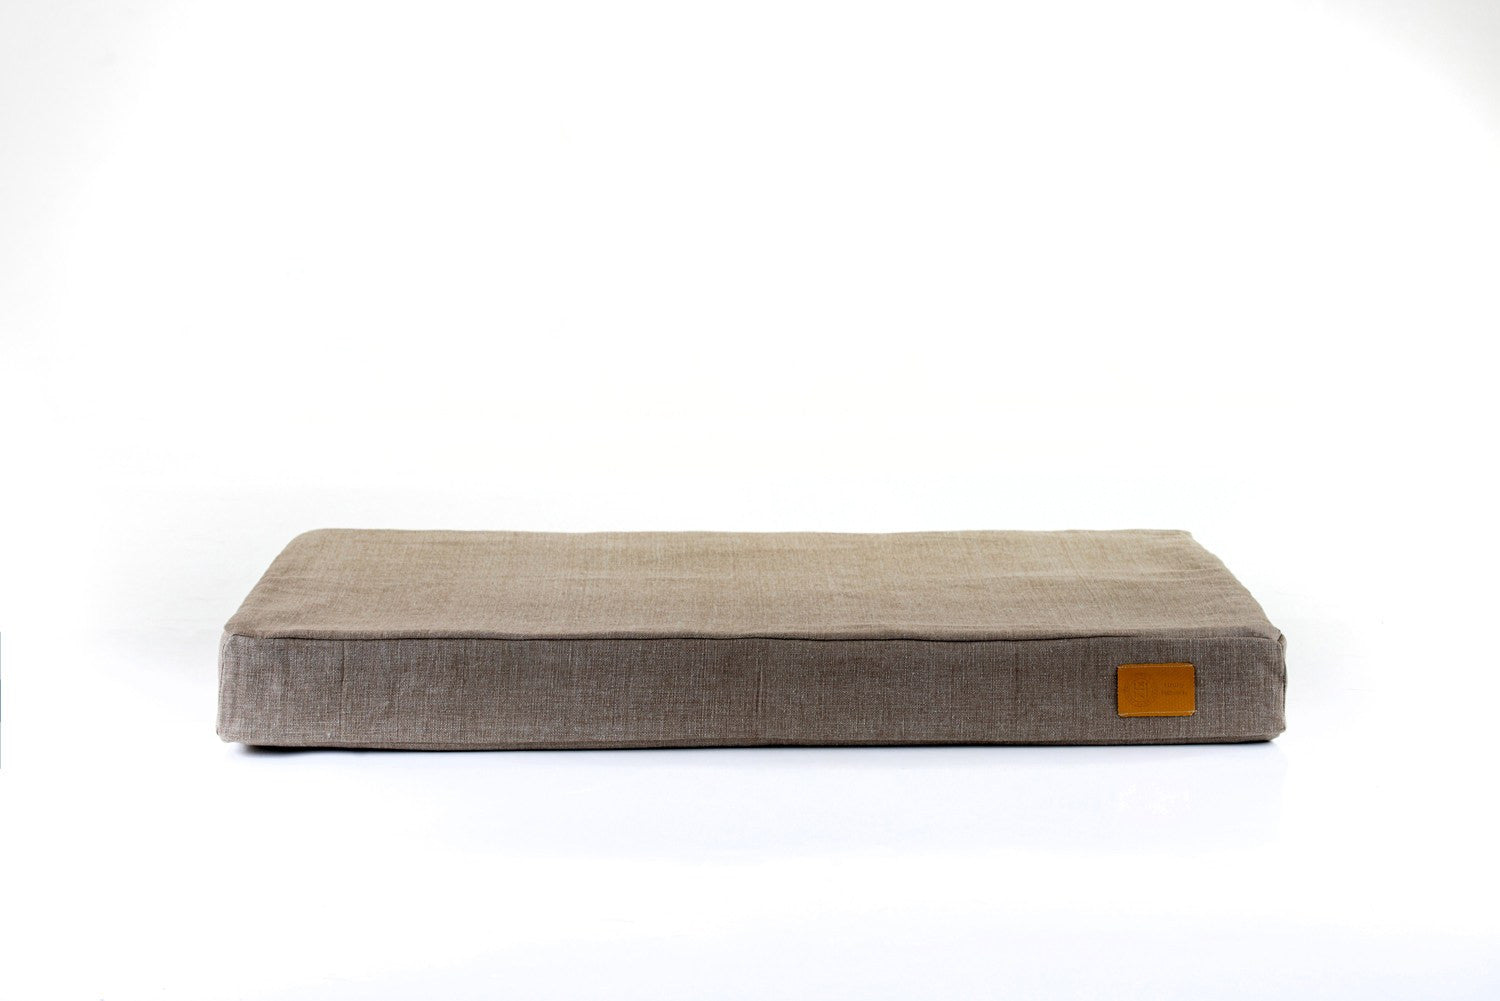 Organic Olive Cotton Wild Rover natural dog bed from Hixx.